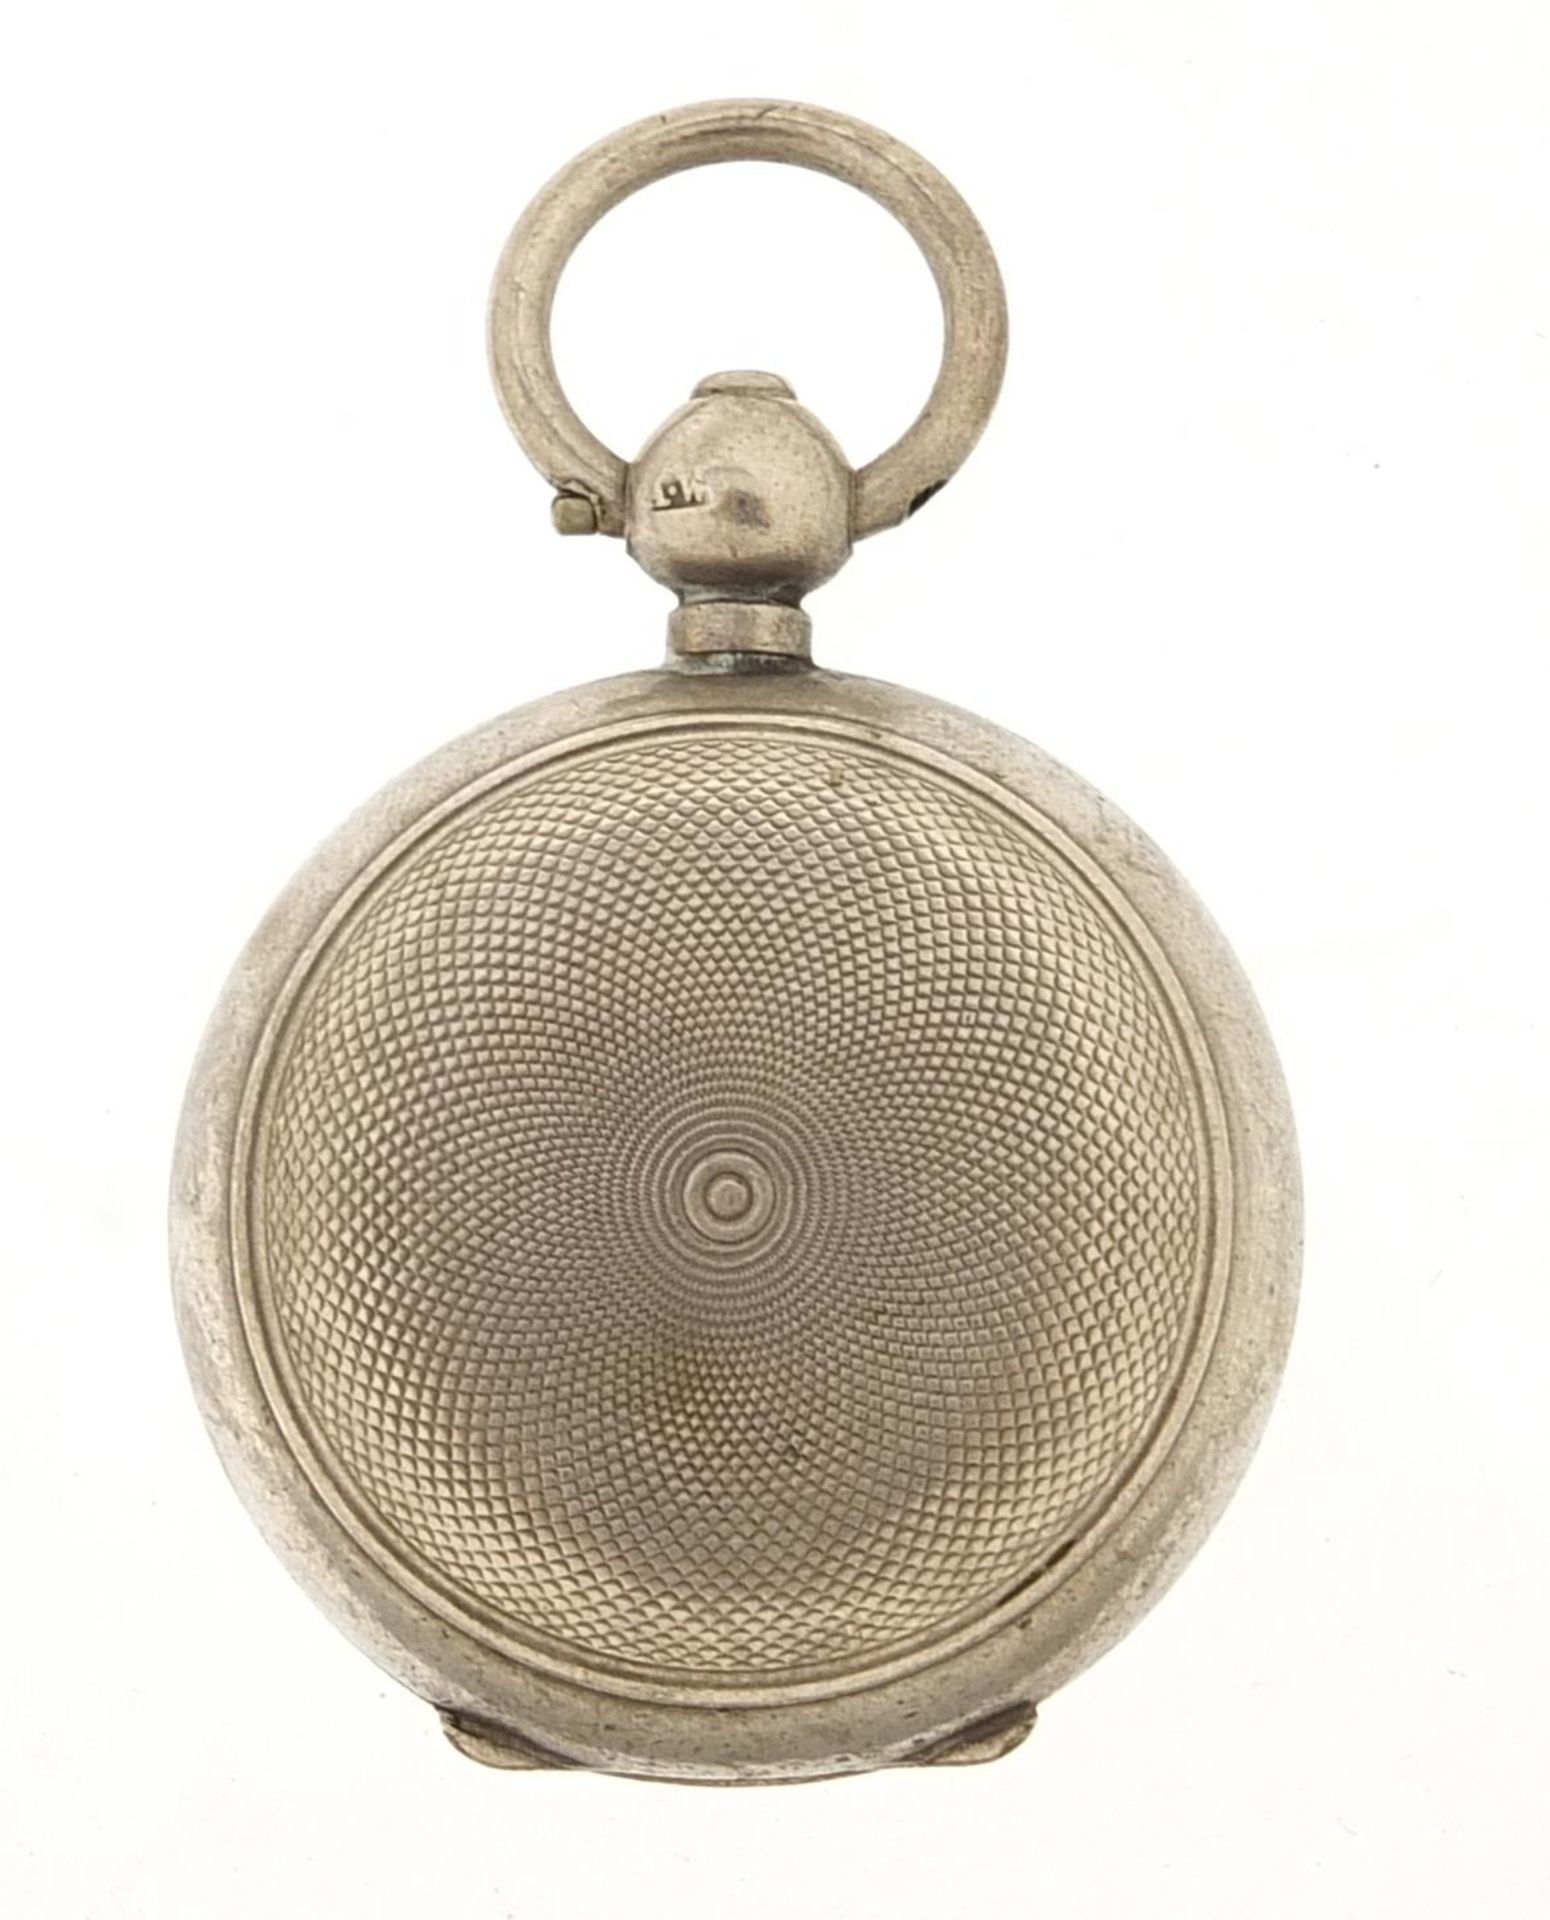 Dennison Wigley & Co, Edwardian silver sovereign case with engine turned body, Birmingham 1903, 3. - Image 2 of 5